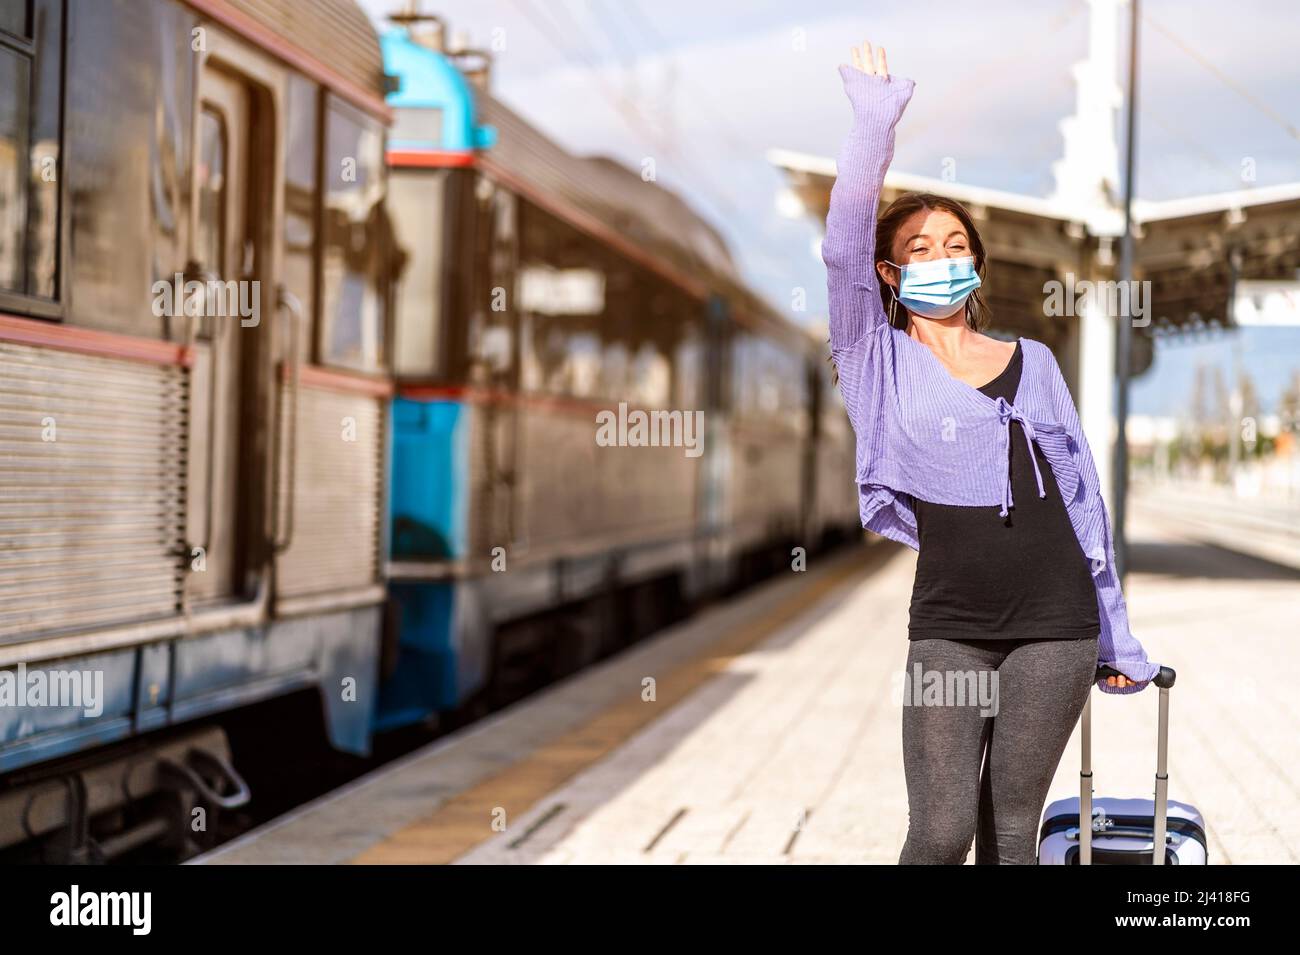 A young woman in mask and with luggage greetings somebody at the platform of train station Stock Photo